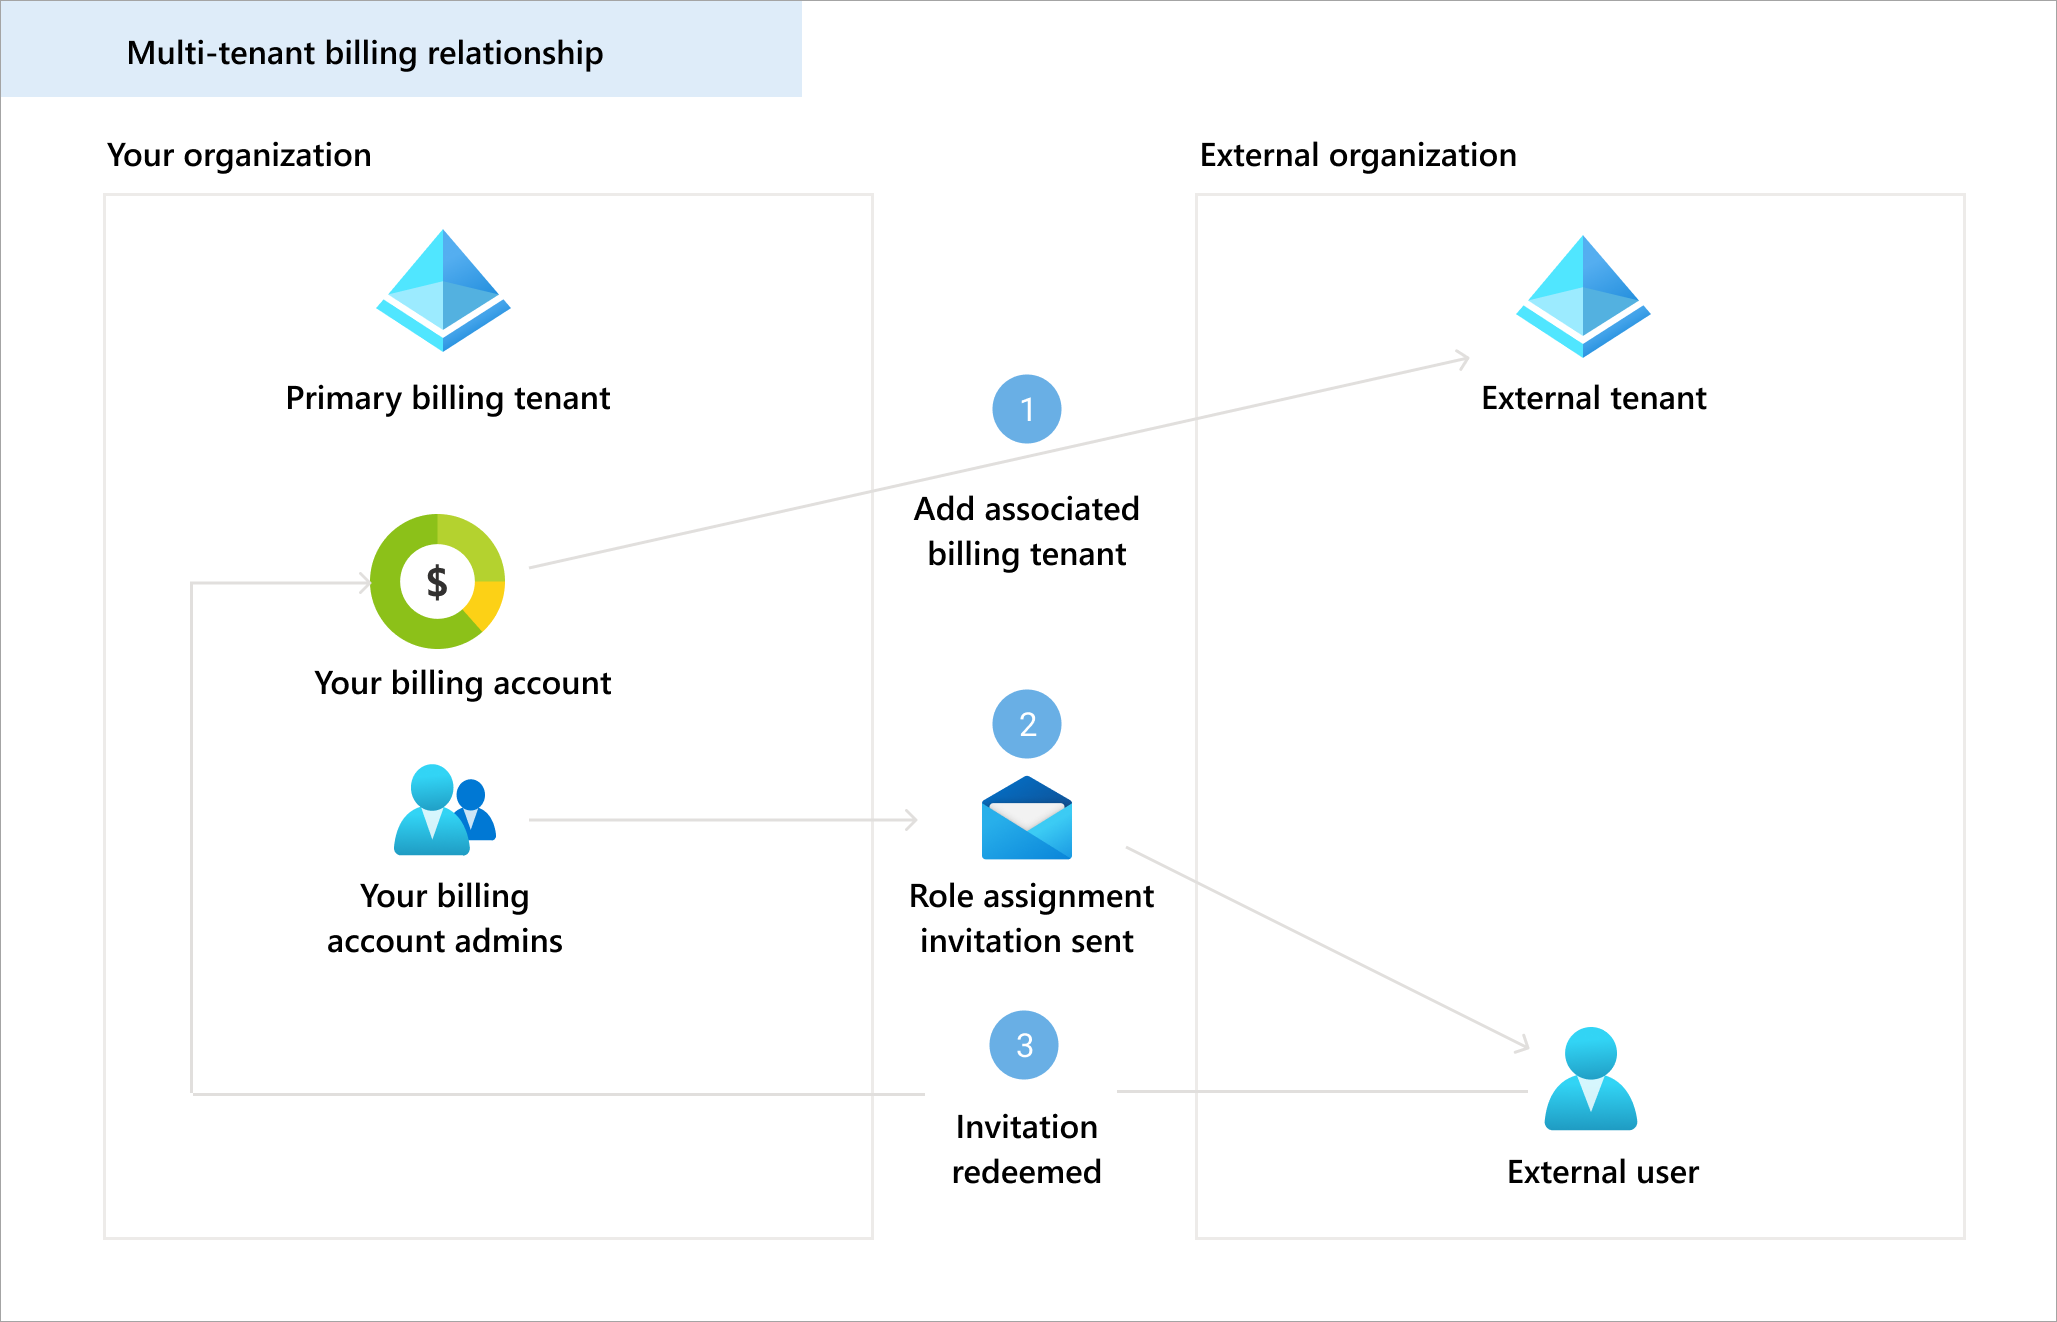 Illustration showing associated billing tenant role assignment.